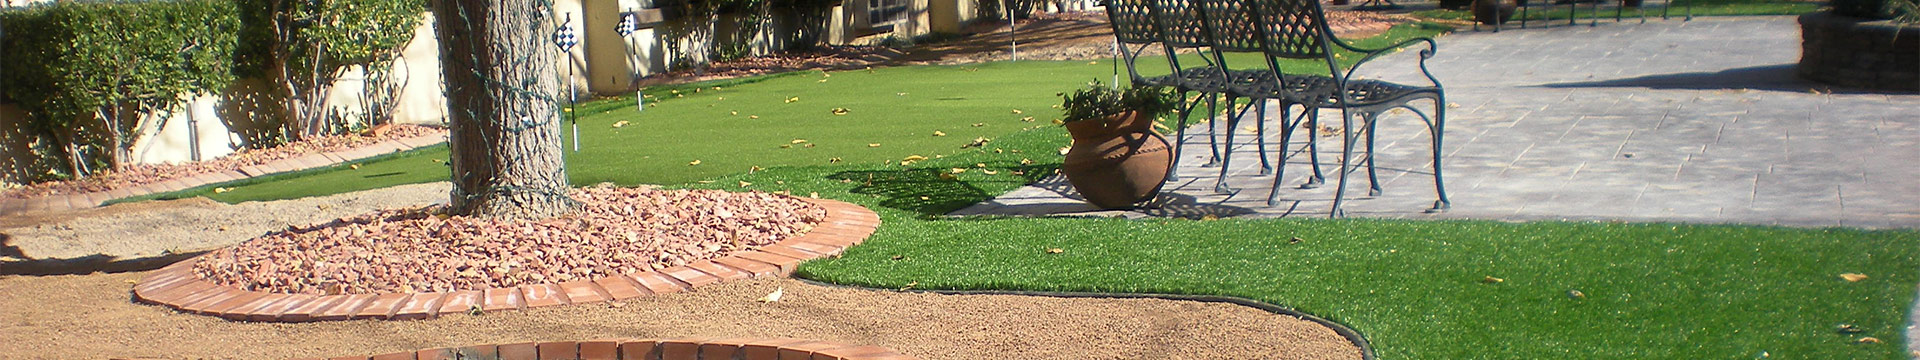 Artificial Grass, fabric upholstery supplies, foam supplies, upholstery supply, vinyl supply, leather fabric, 
                              polyester fabric, buttons, automotive carpet, spray glue, adhesive, fabric trim, automotive fabric, upholstery tools, vinyl wraps, paint and glue supplies, 
                              free upholstery estimates, marine and outdoor vinyl, commercial vinyl, fabric store, fabric shop, upholstery store 
                              el paso, texas, material store el paso, texas, material retailer, upholstery retail store, fabric and foam store, american fabric store, 
                              fabric padding, fabric supply store.